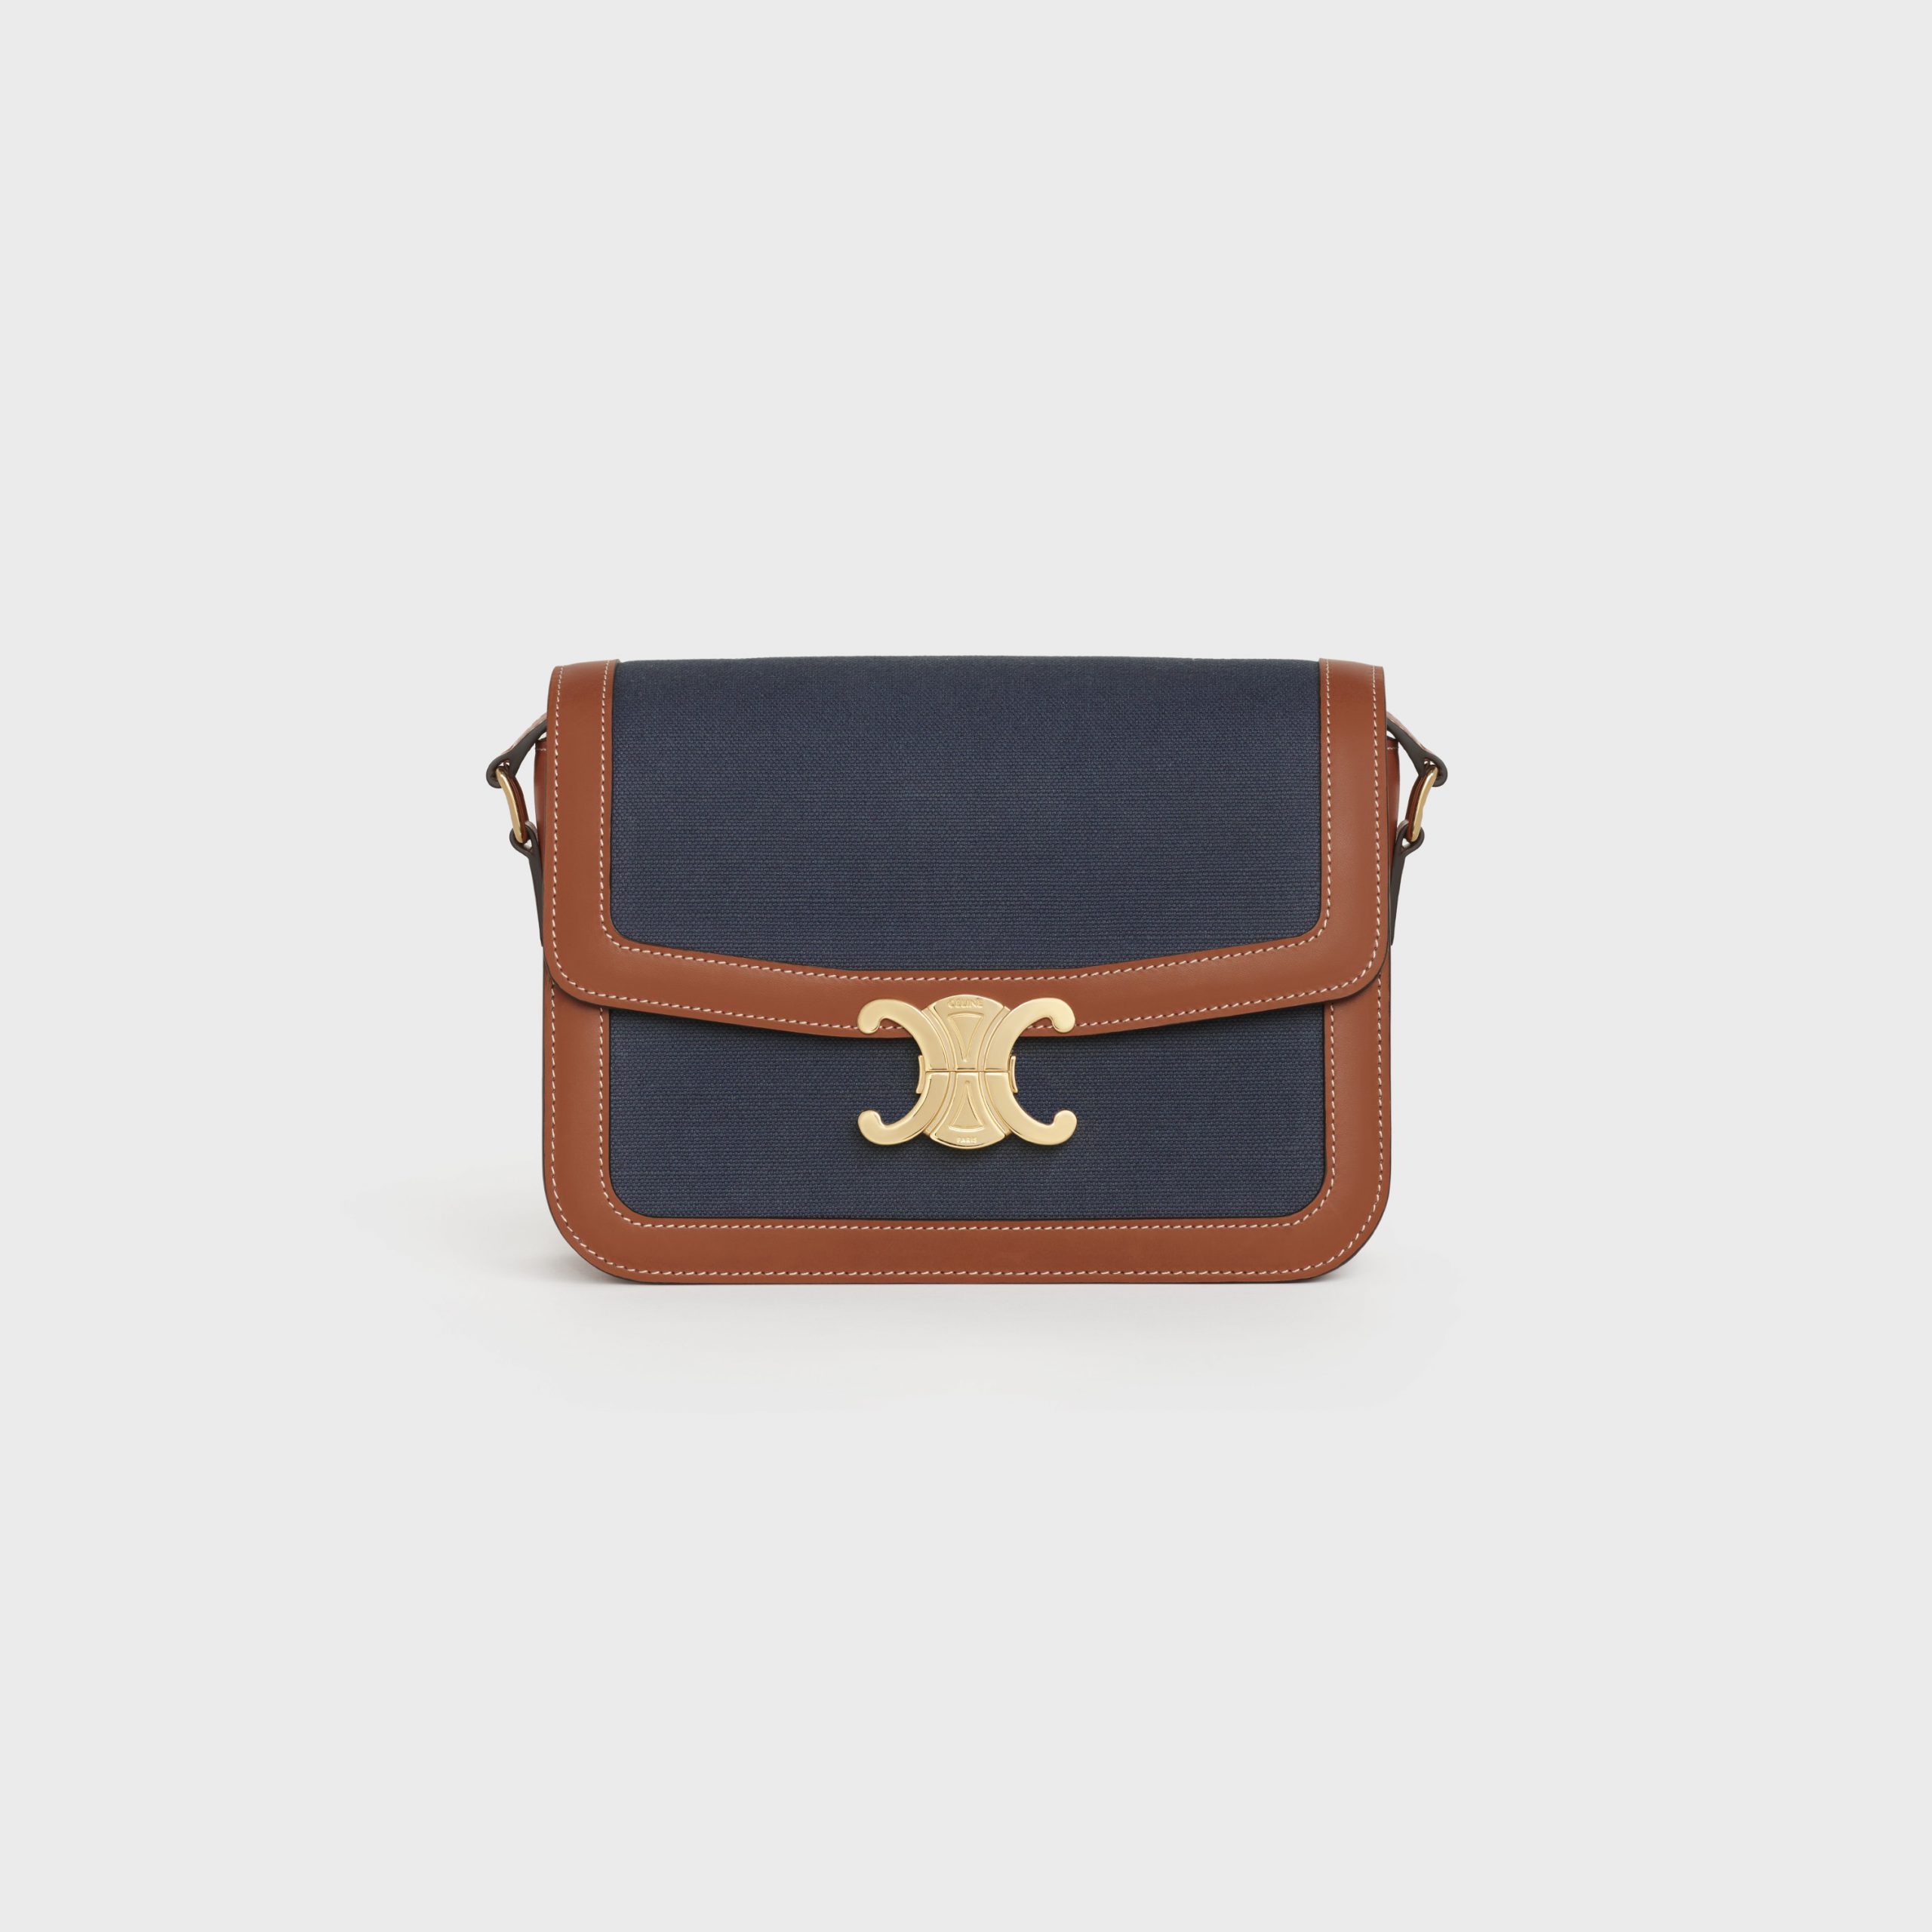 Celine Medium Triomphe Bag In Textile And Calfskin – Navy / Tan – 191242CD3.07AT